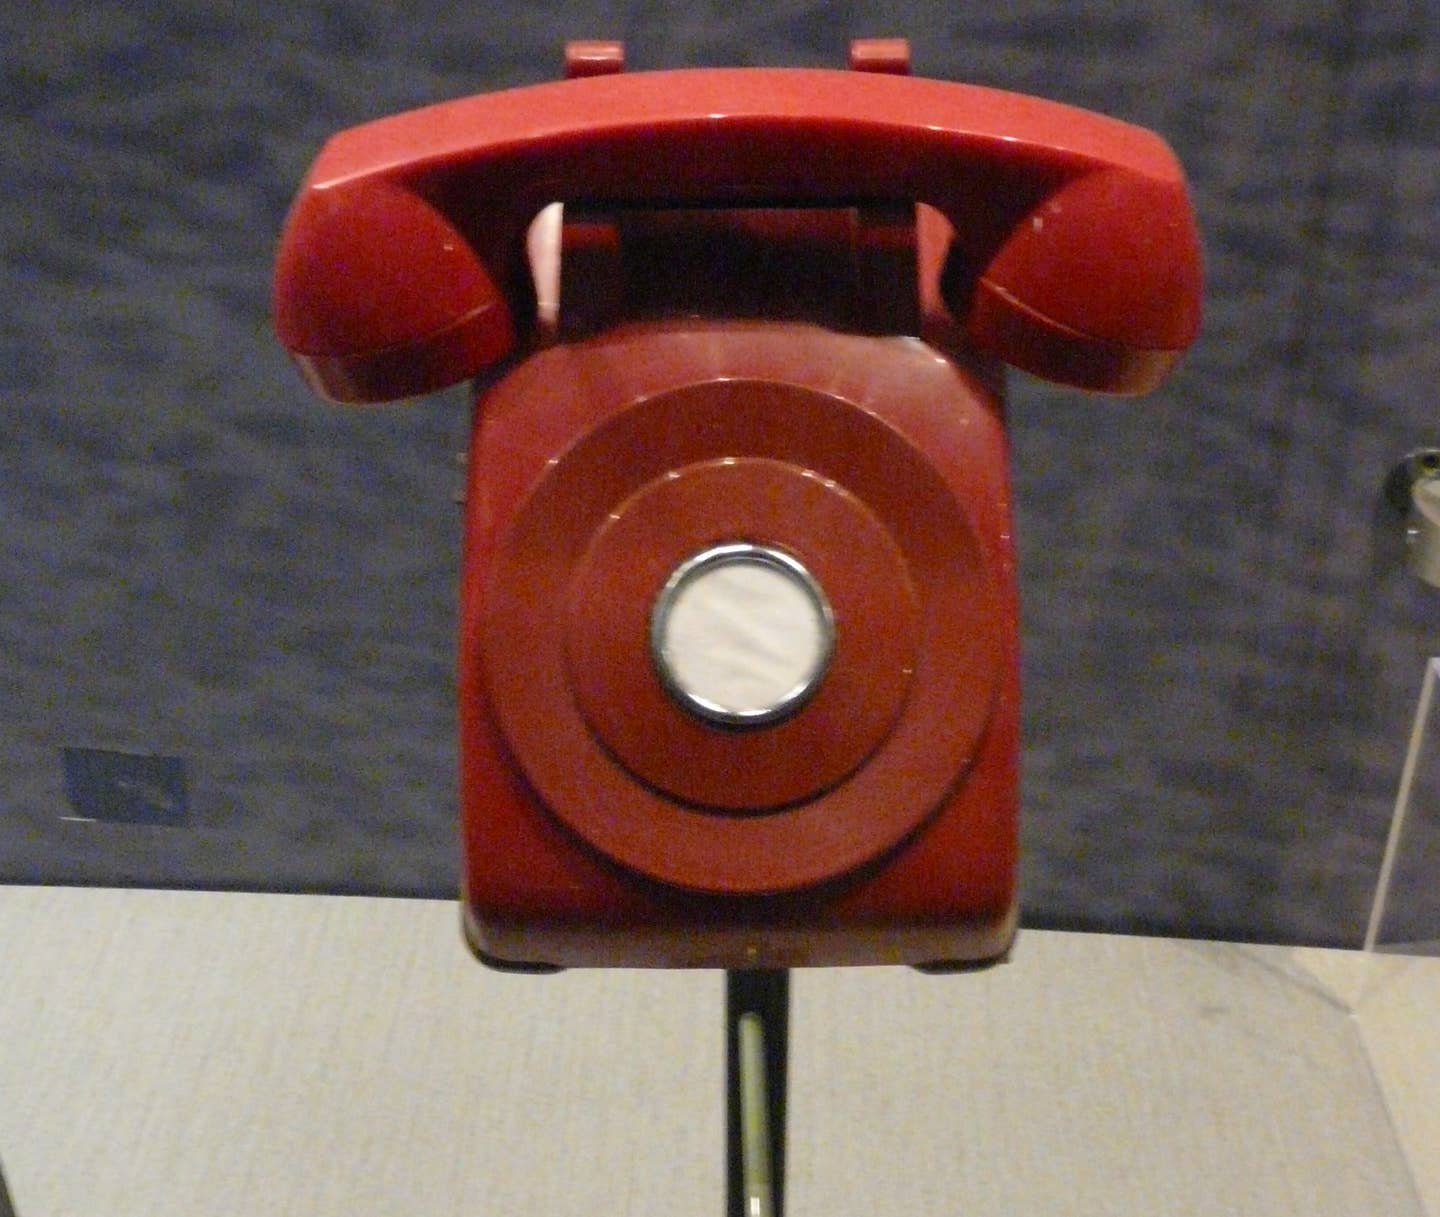 The origin of the famous red phone in the Oval Office